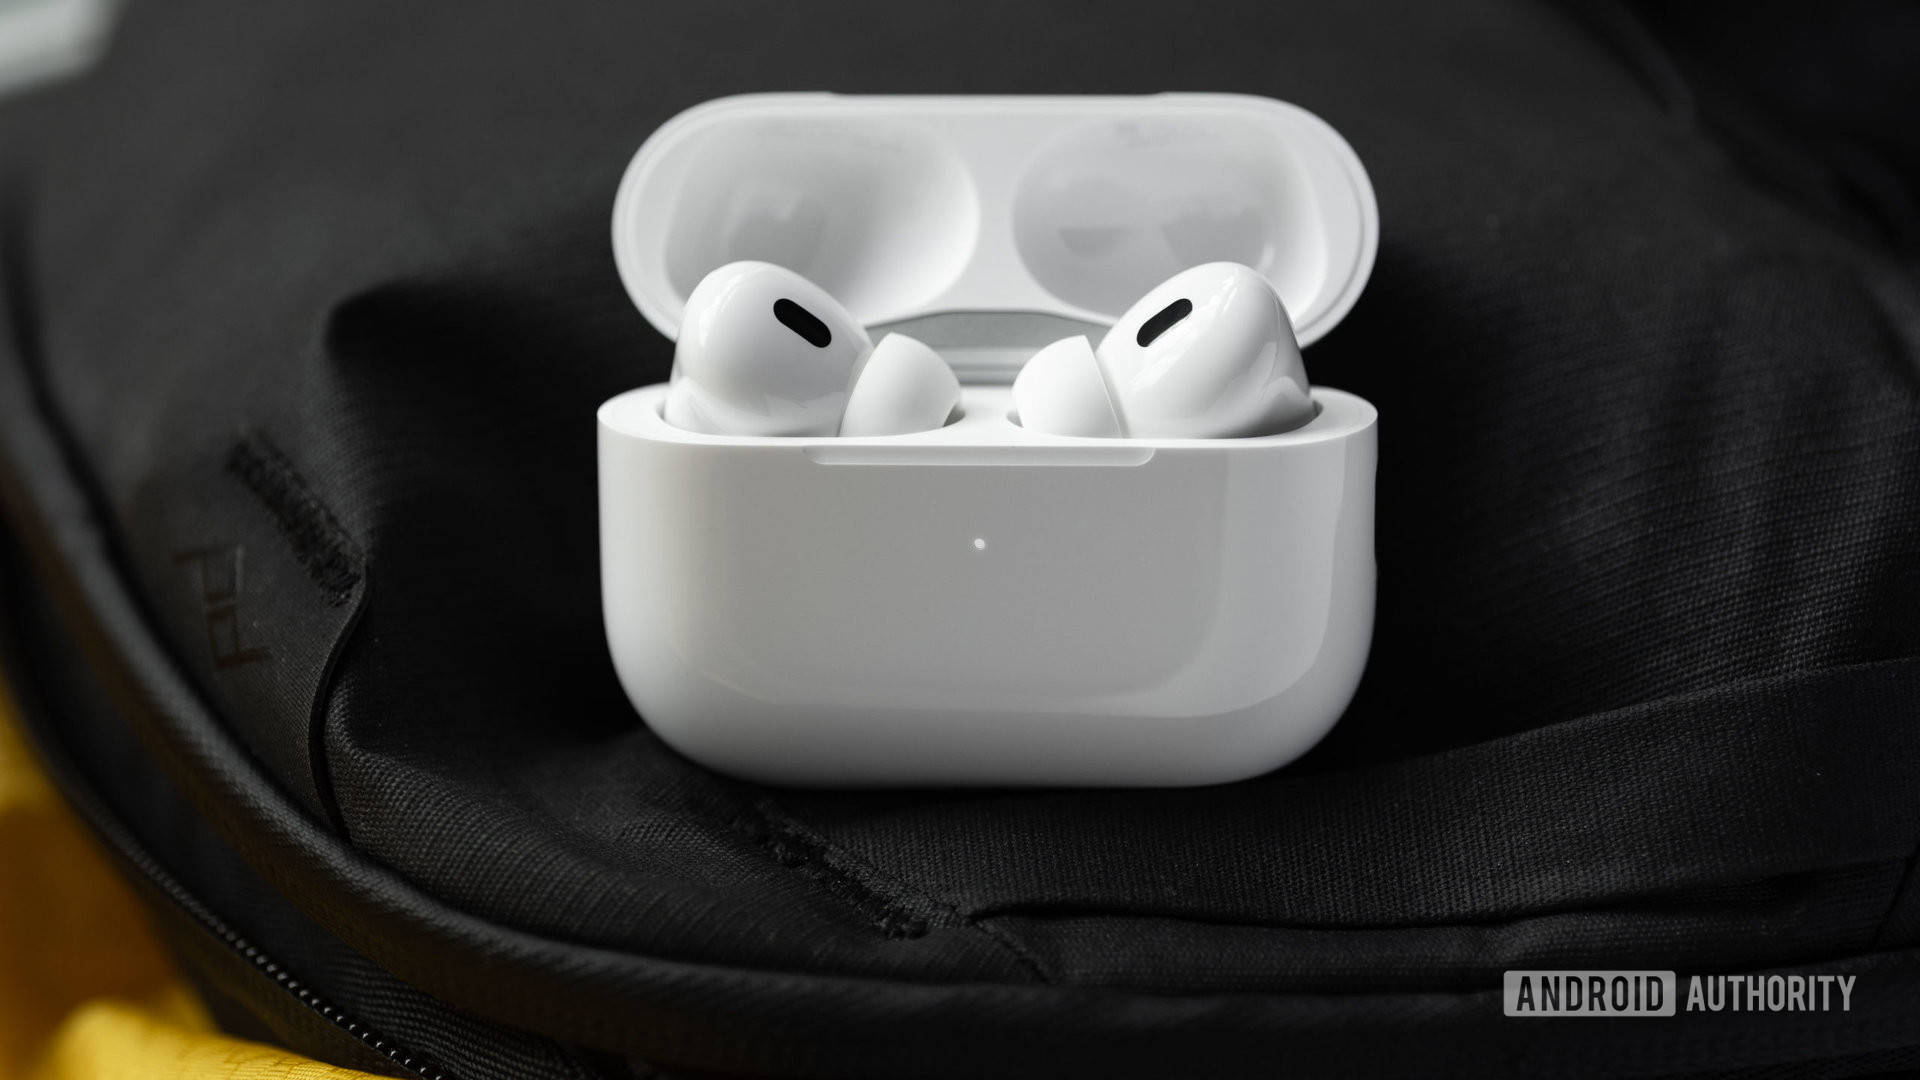 The Apple AirPods Pro (2nd generation) case is open and laying at an angle to show the earbuds and their sensors.